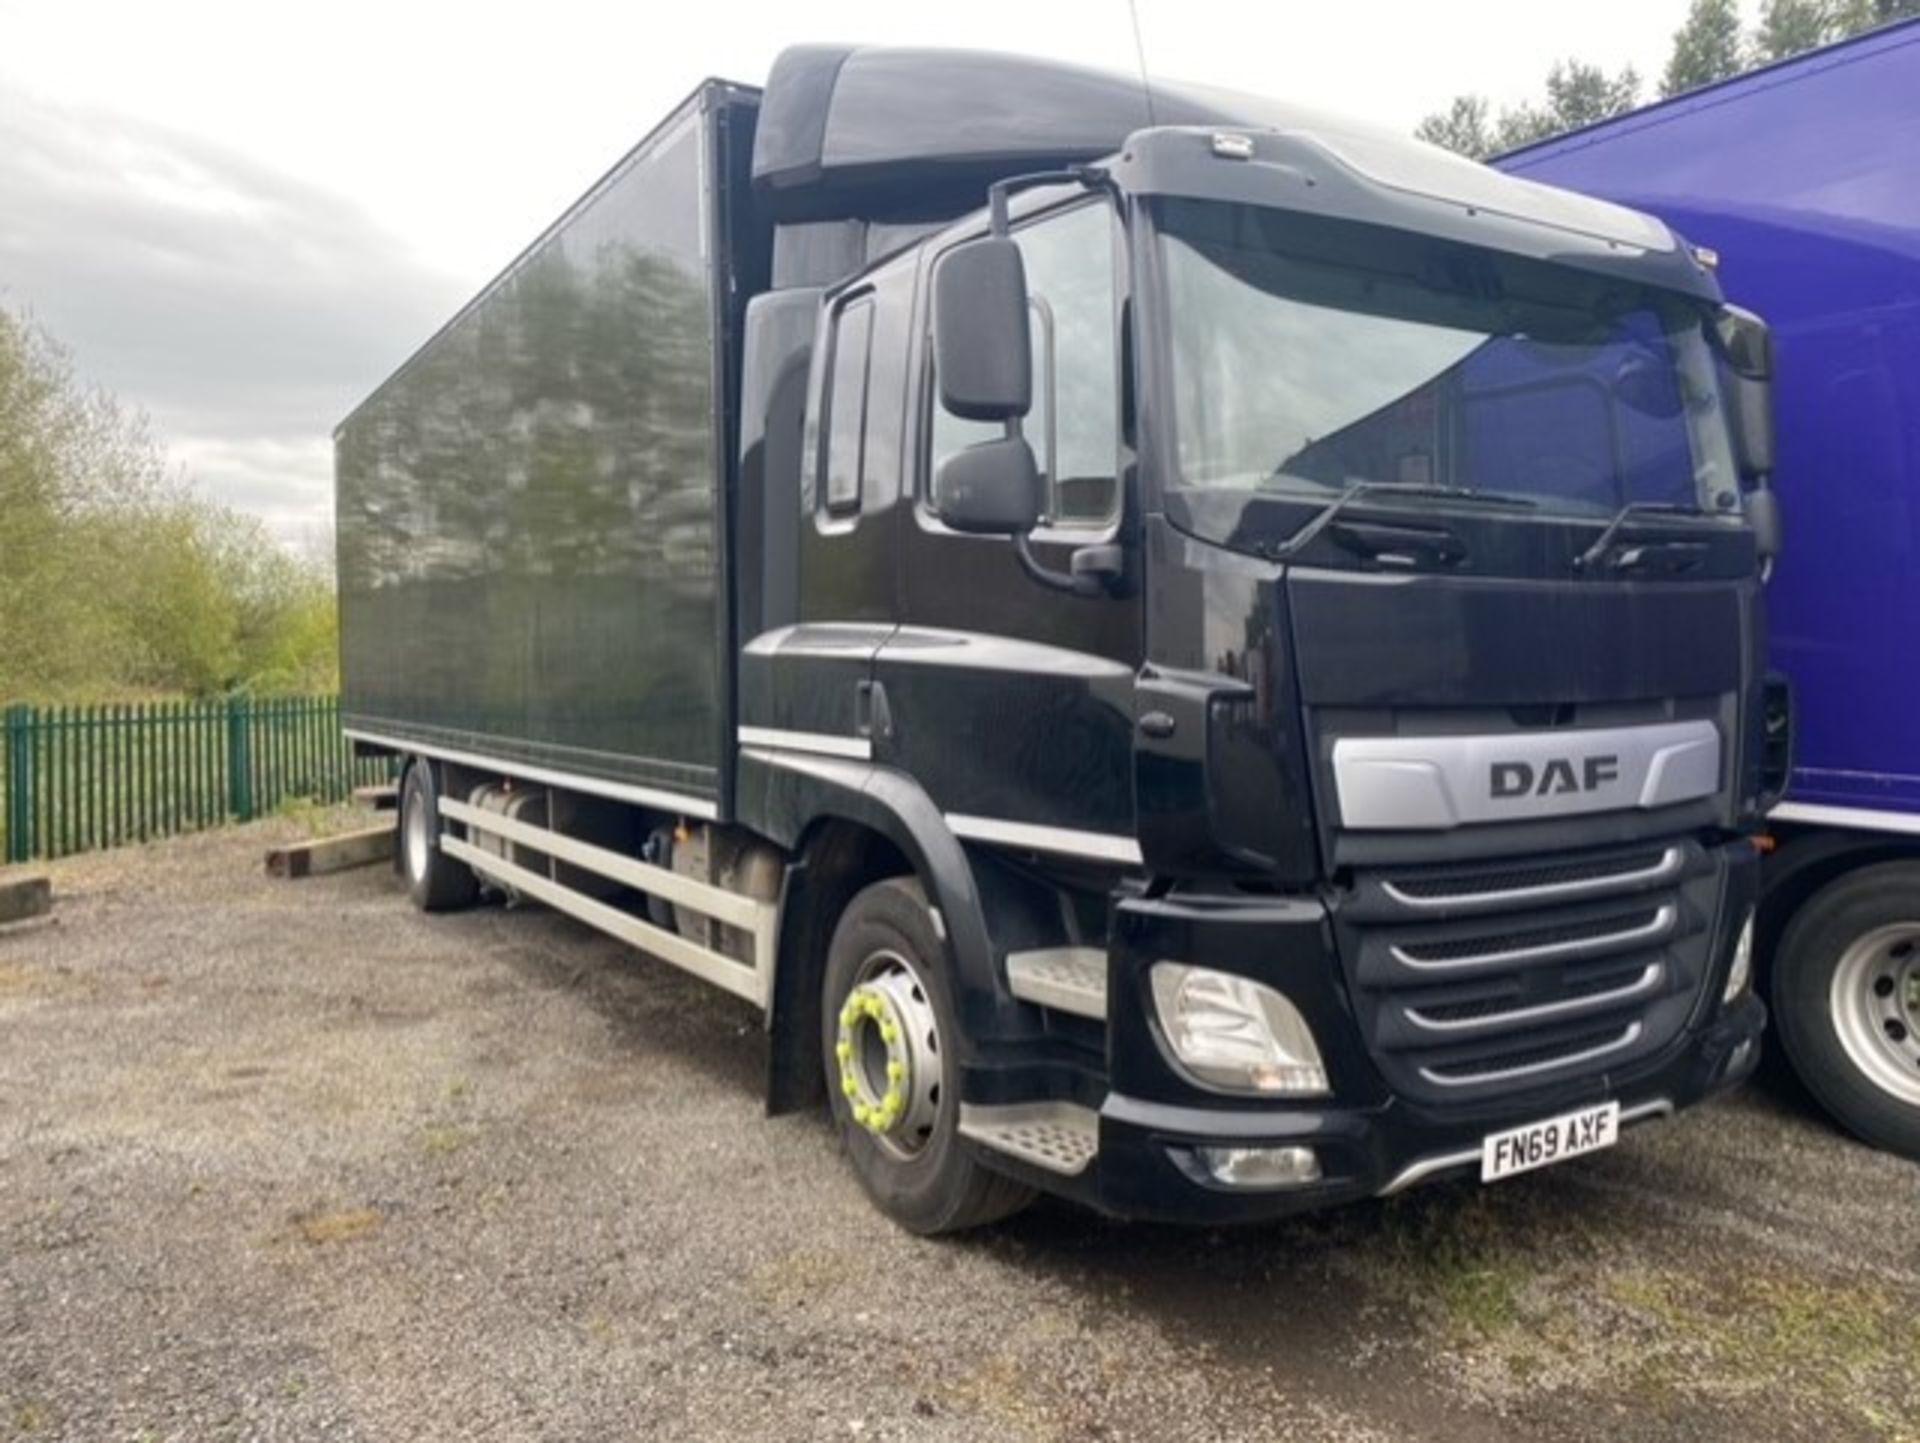 2019, DAF CF 260 FA (Ex-Fleet Owned & Maintained) - FN69 AXF (18 Ton Rigid Truck with Tail Lift)